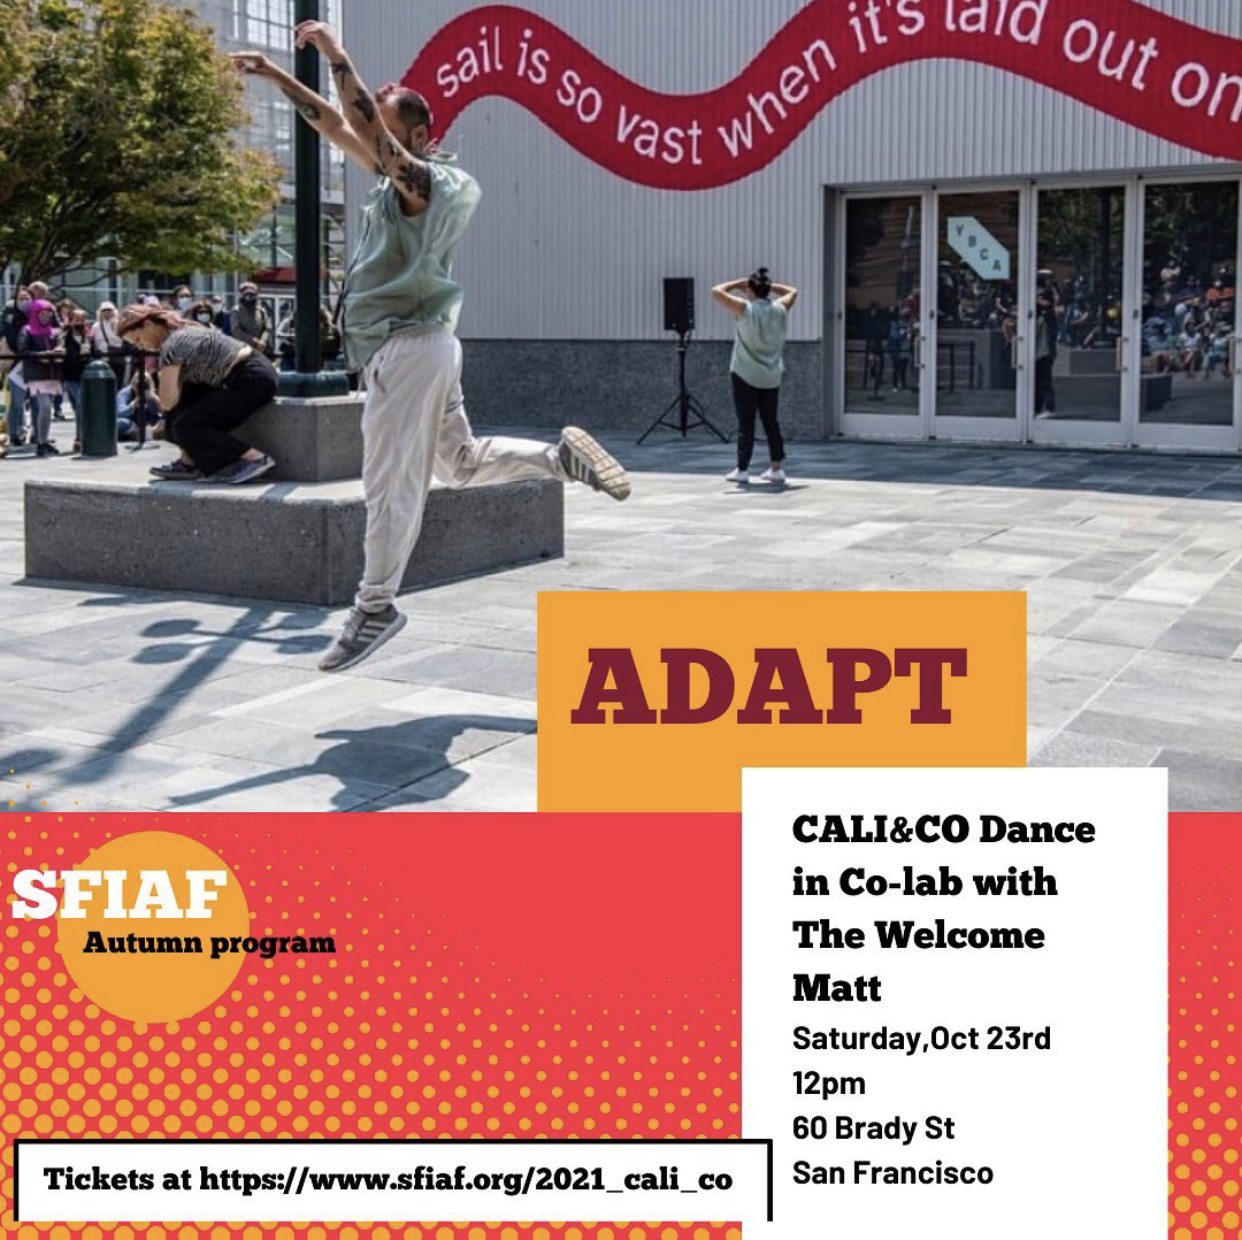 Flyer that says: ADAPT, SFIAF Autumn Program, CALI & CO DANCE In co-lab with The Welcome Matt, Saturday Oct 23rd, 12pm, 60 Brady Street San Francisco, tickets at https://www.sfiaf.org/2021_cali_co